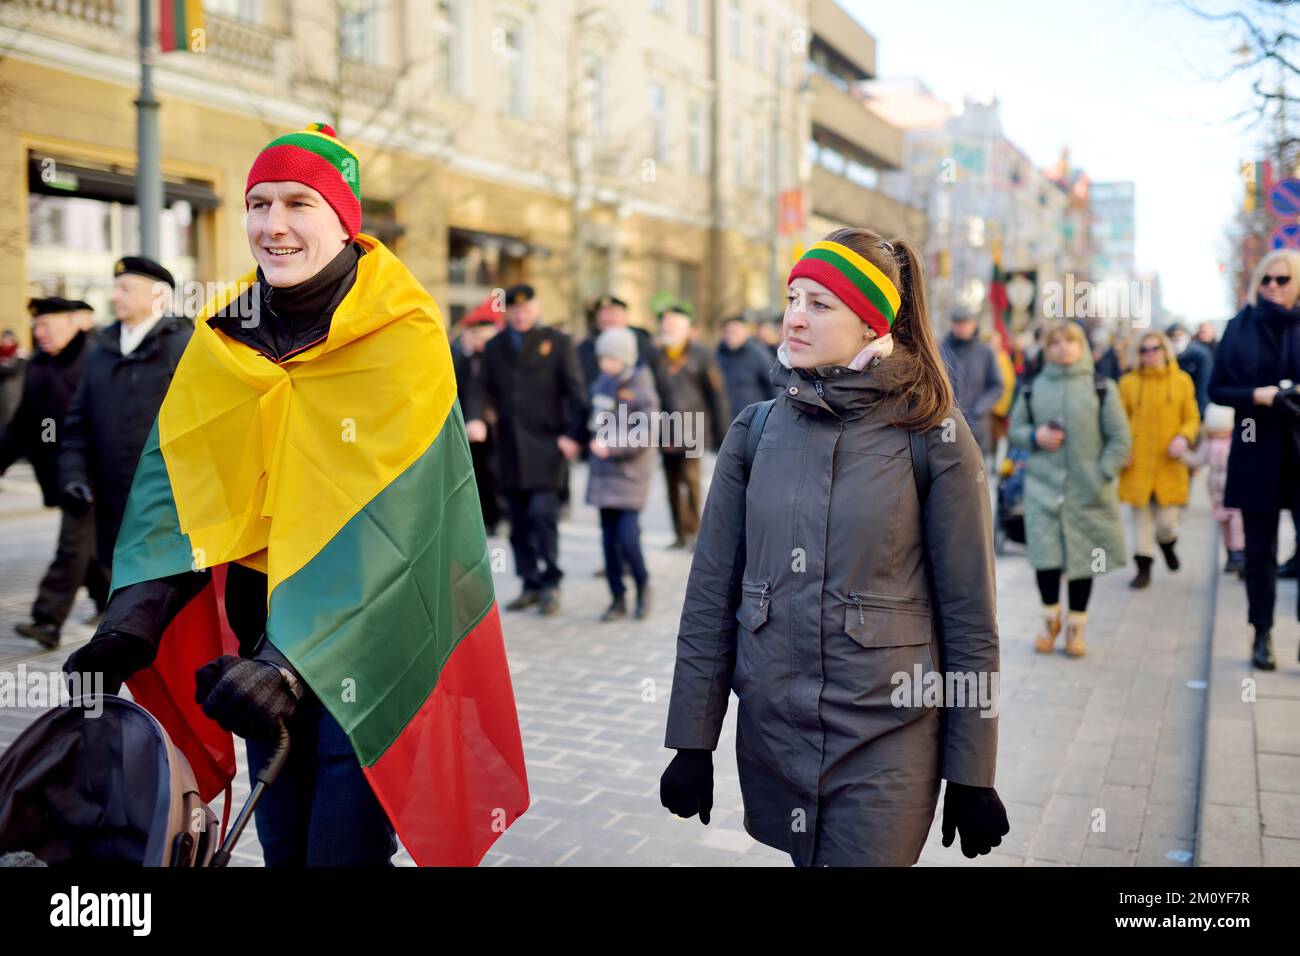 VILNIUS, LITHUANIA - MARCH 11, 2022: Cheerful people carrying tricolor Lithuanian flags on a festive events as Lithuania marked the 32th anniversary o Stock Photo